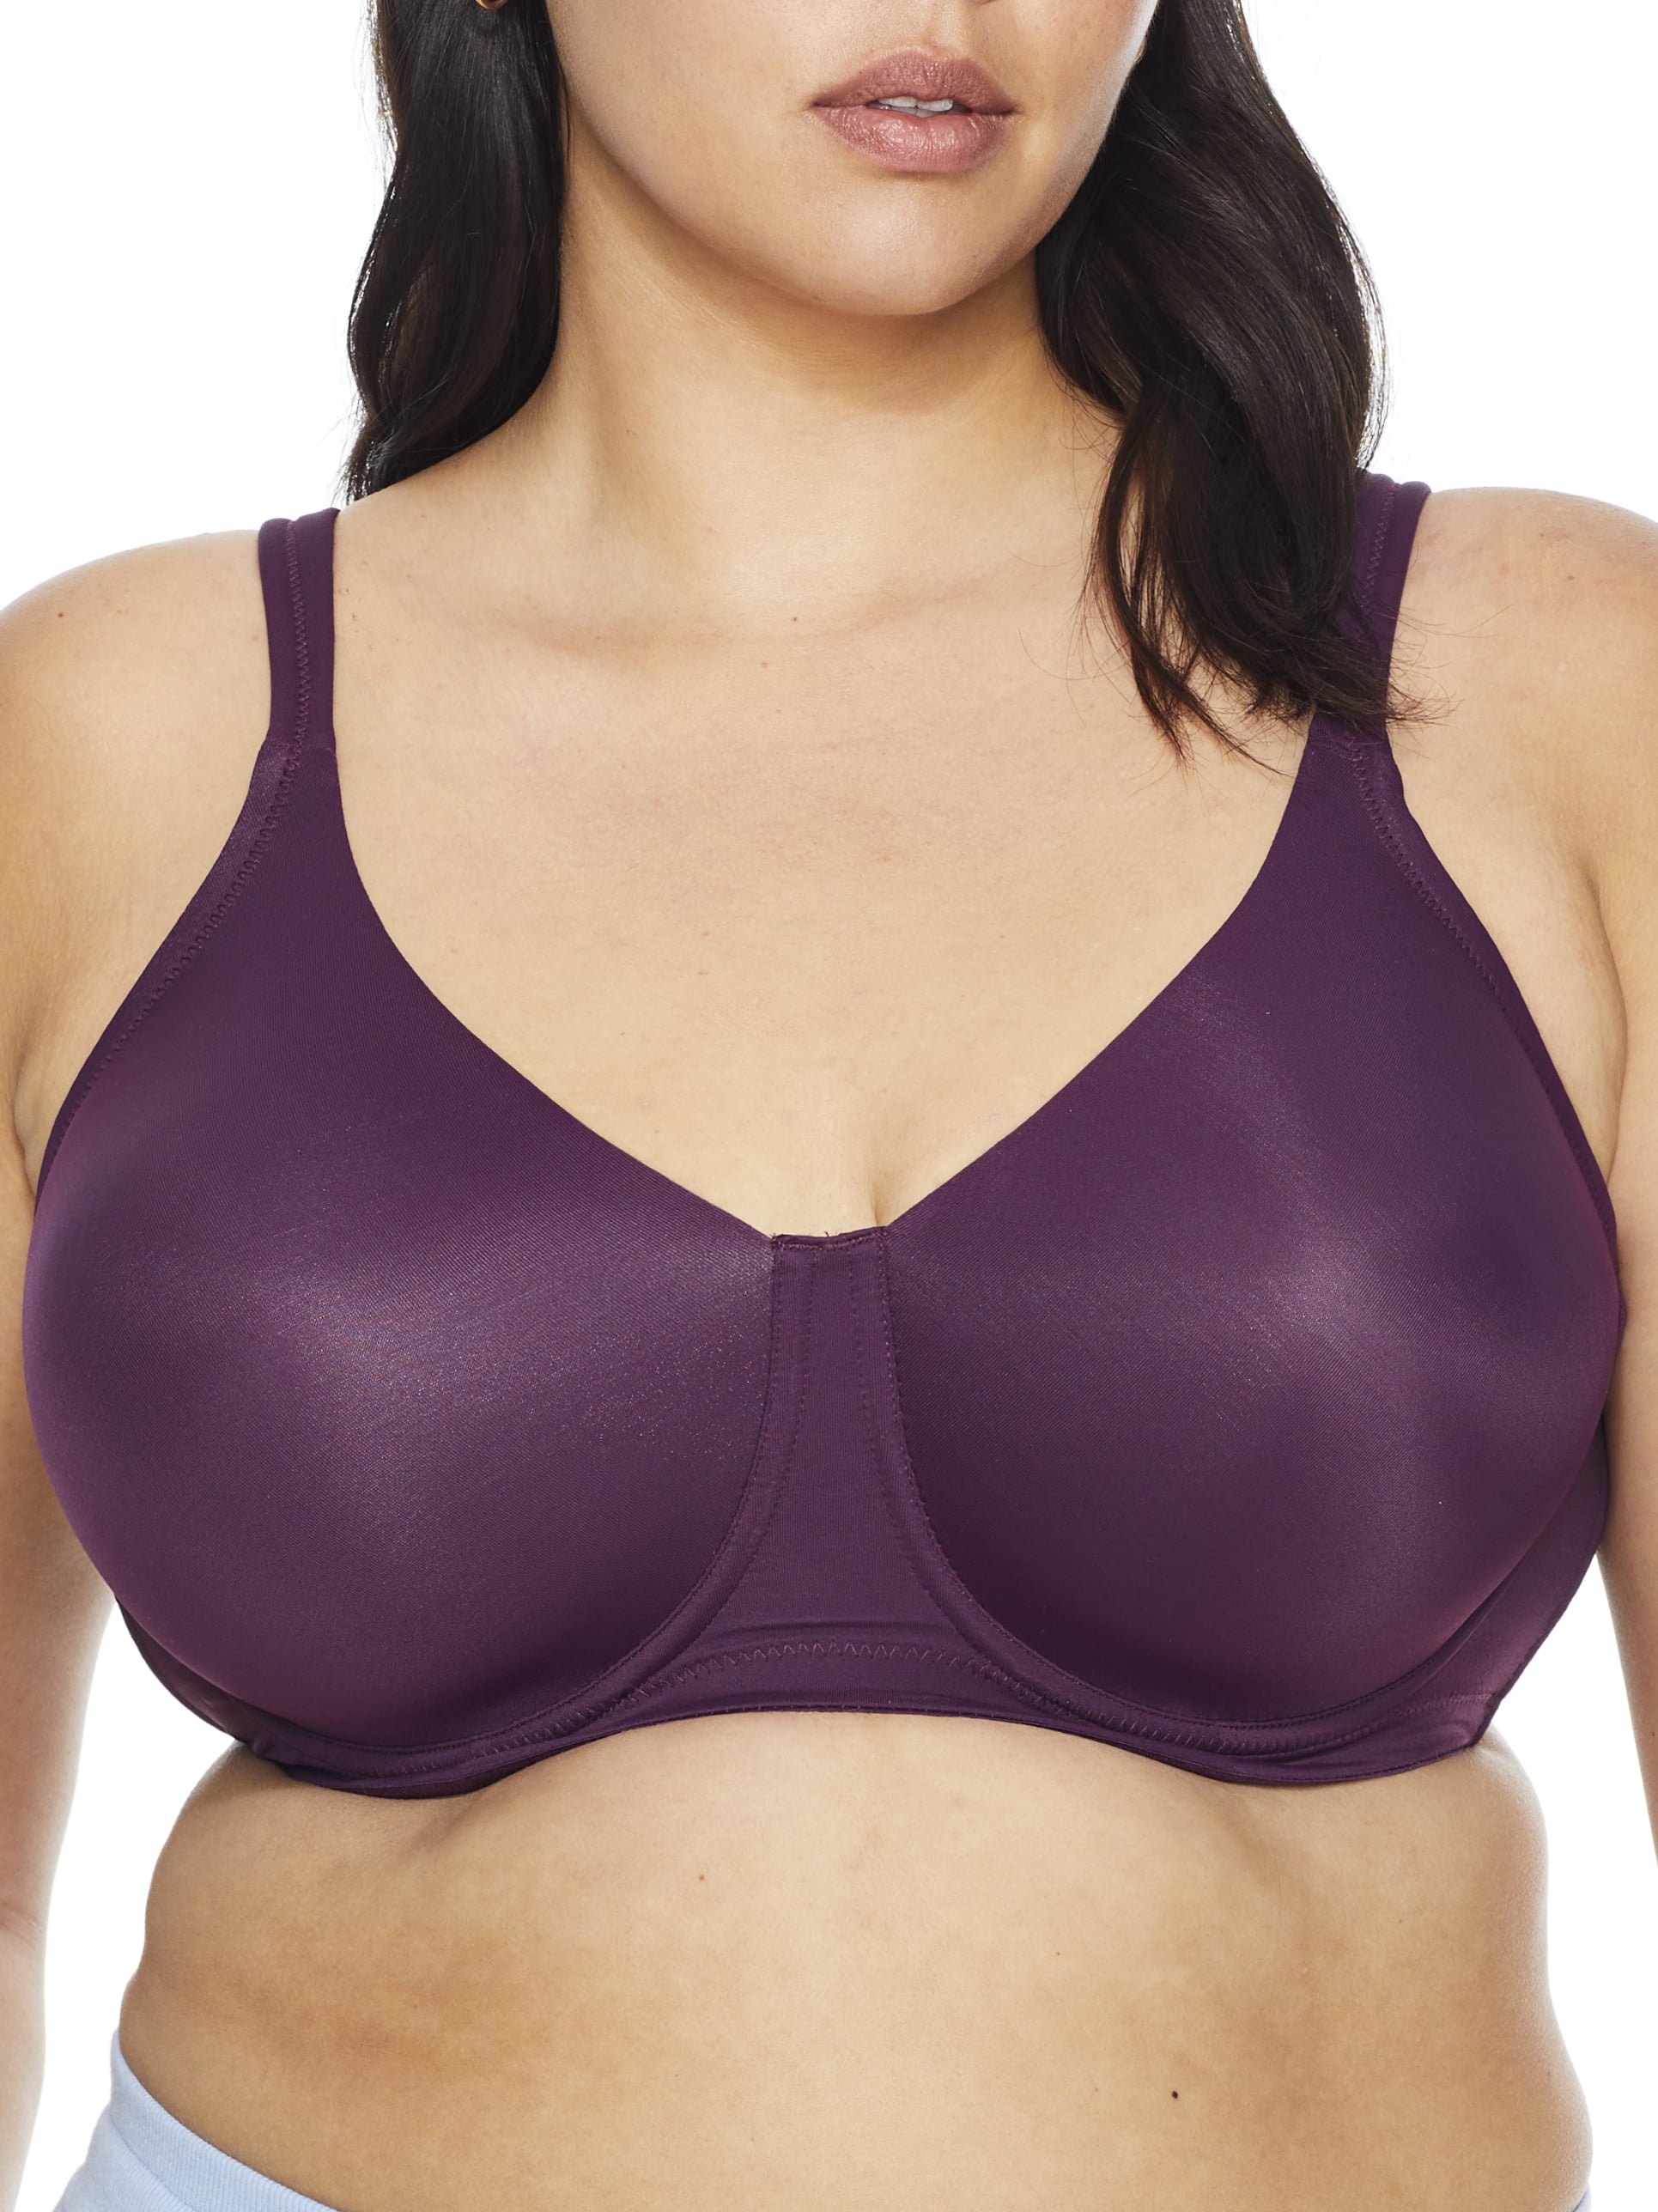 Leading Lady The Brigitte Full Coverage Wirefree - Molded Padded Seamless  Bra in Black, Size: 50G